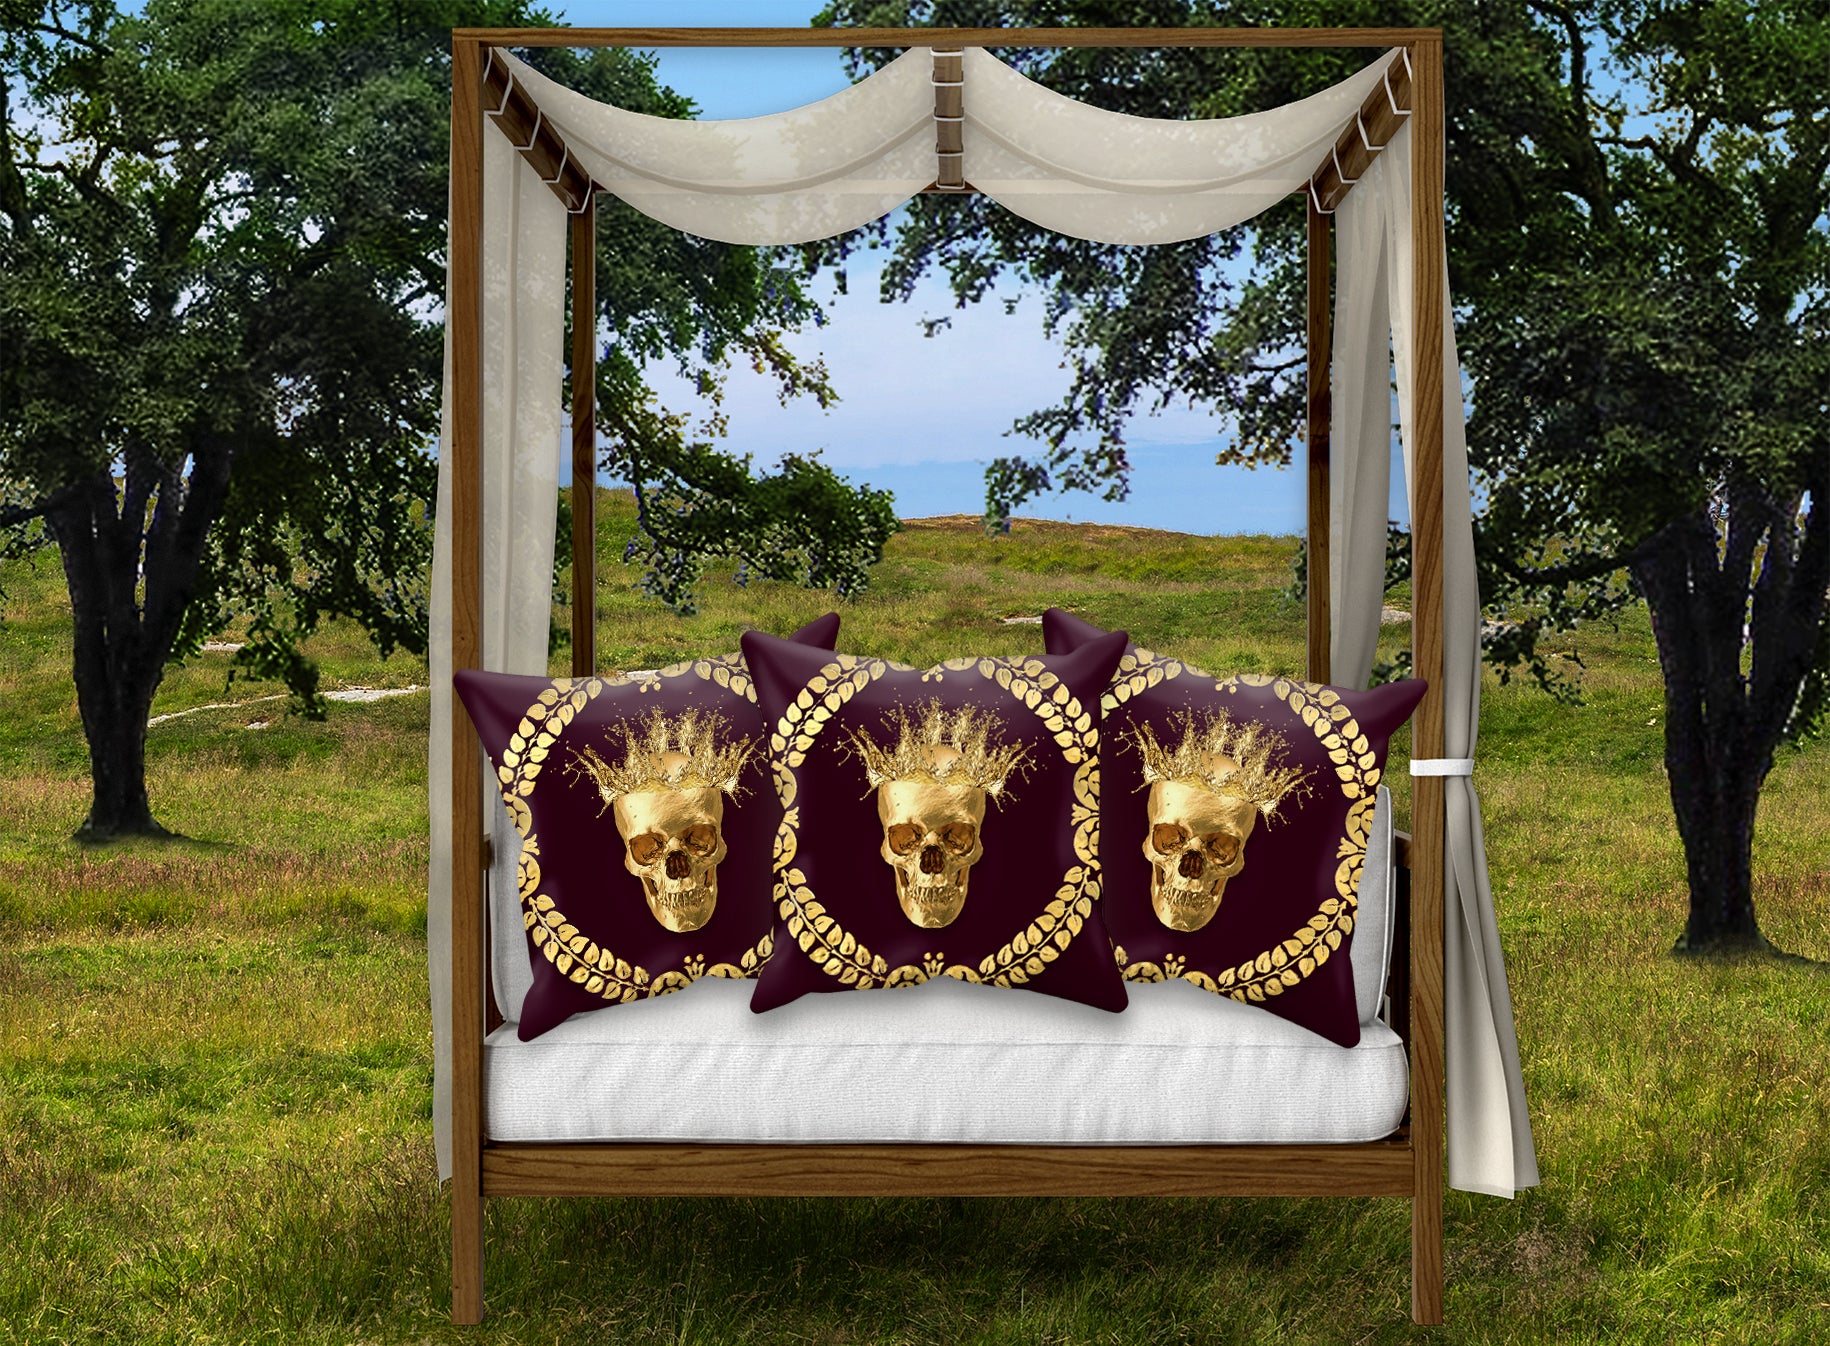 Satin and Suede Pillow Case-Cushion Cover-Gold SKULL-GOLD WREATH- Color EGGPLANT WINE, WINE RED, BURGUNDY, PURPLE